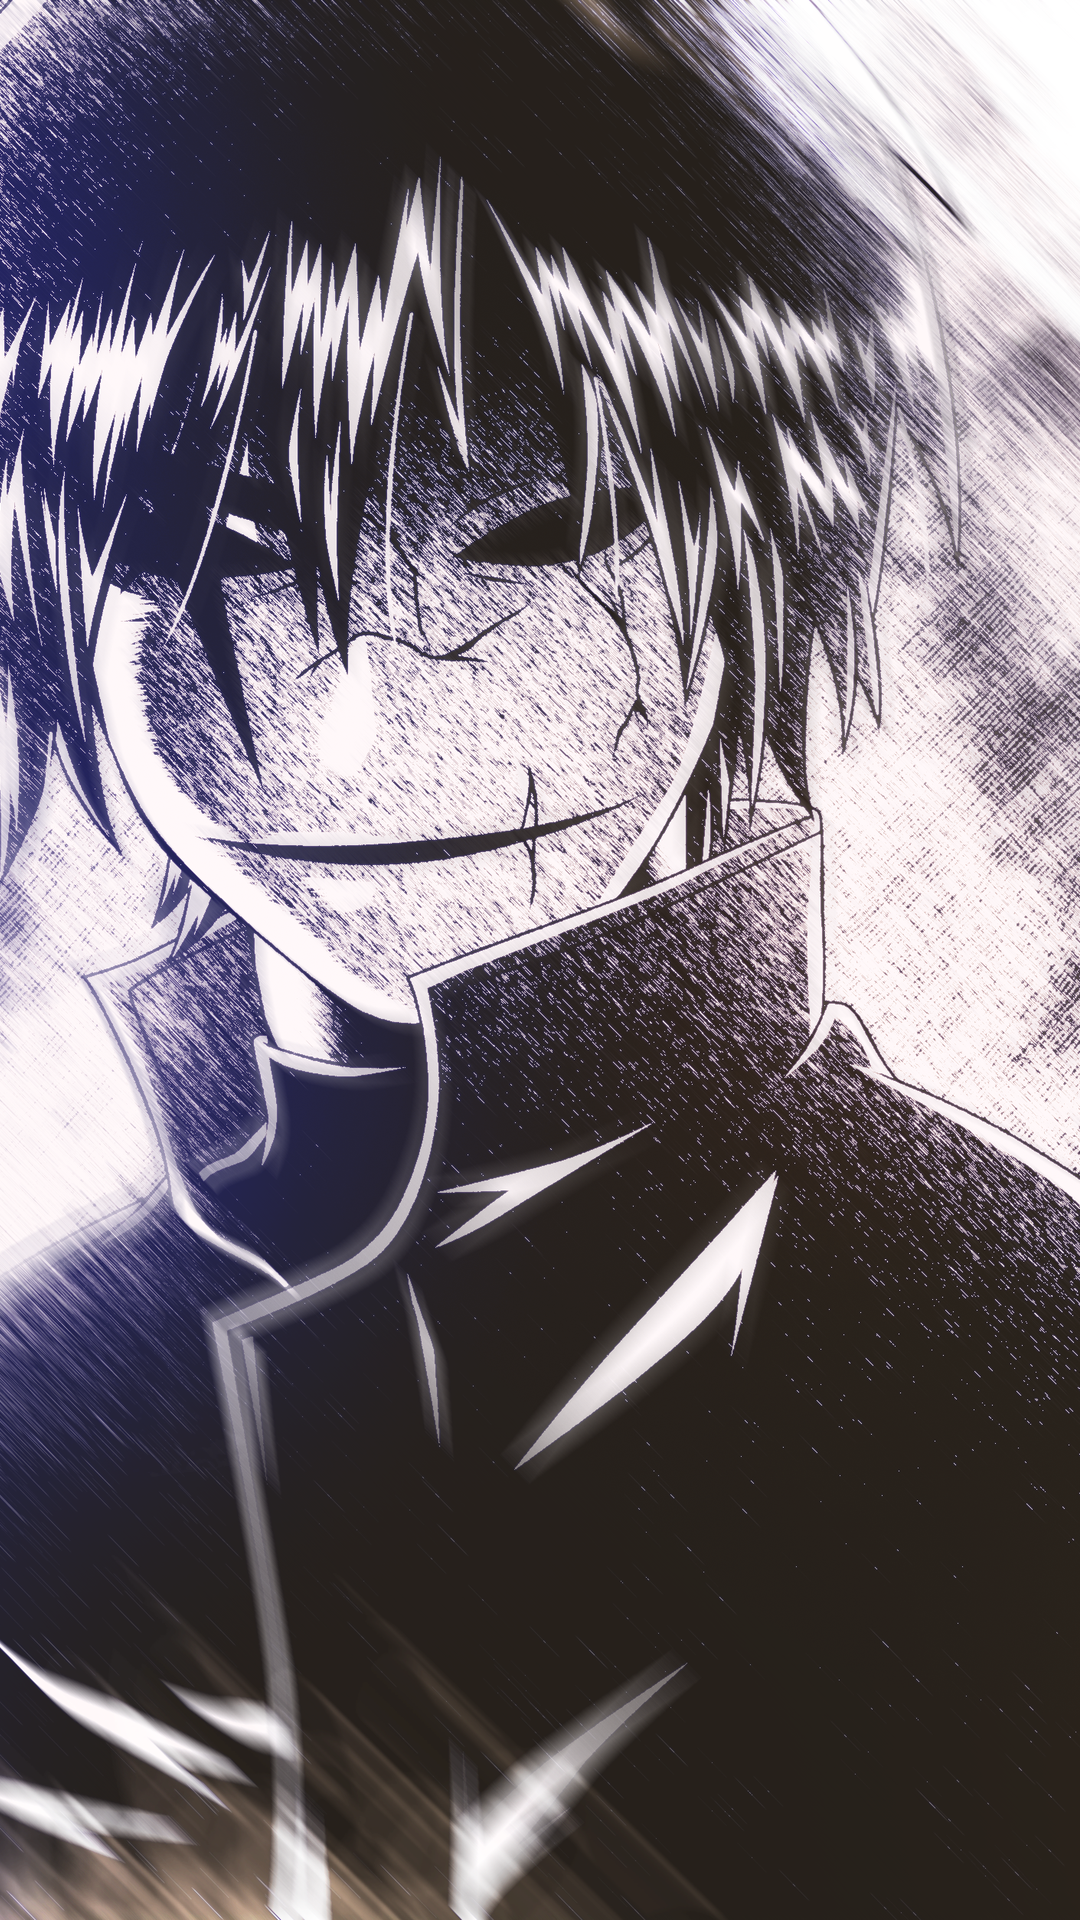 6 Darker Than Black Wallpapers For Iphone And Android By Elizabeth Wagner